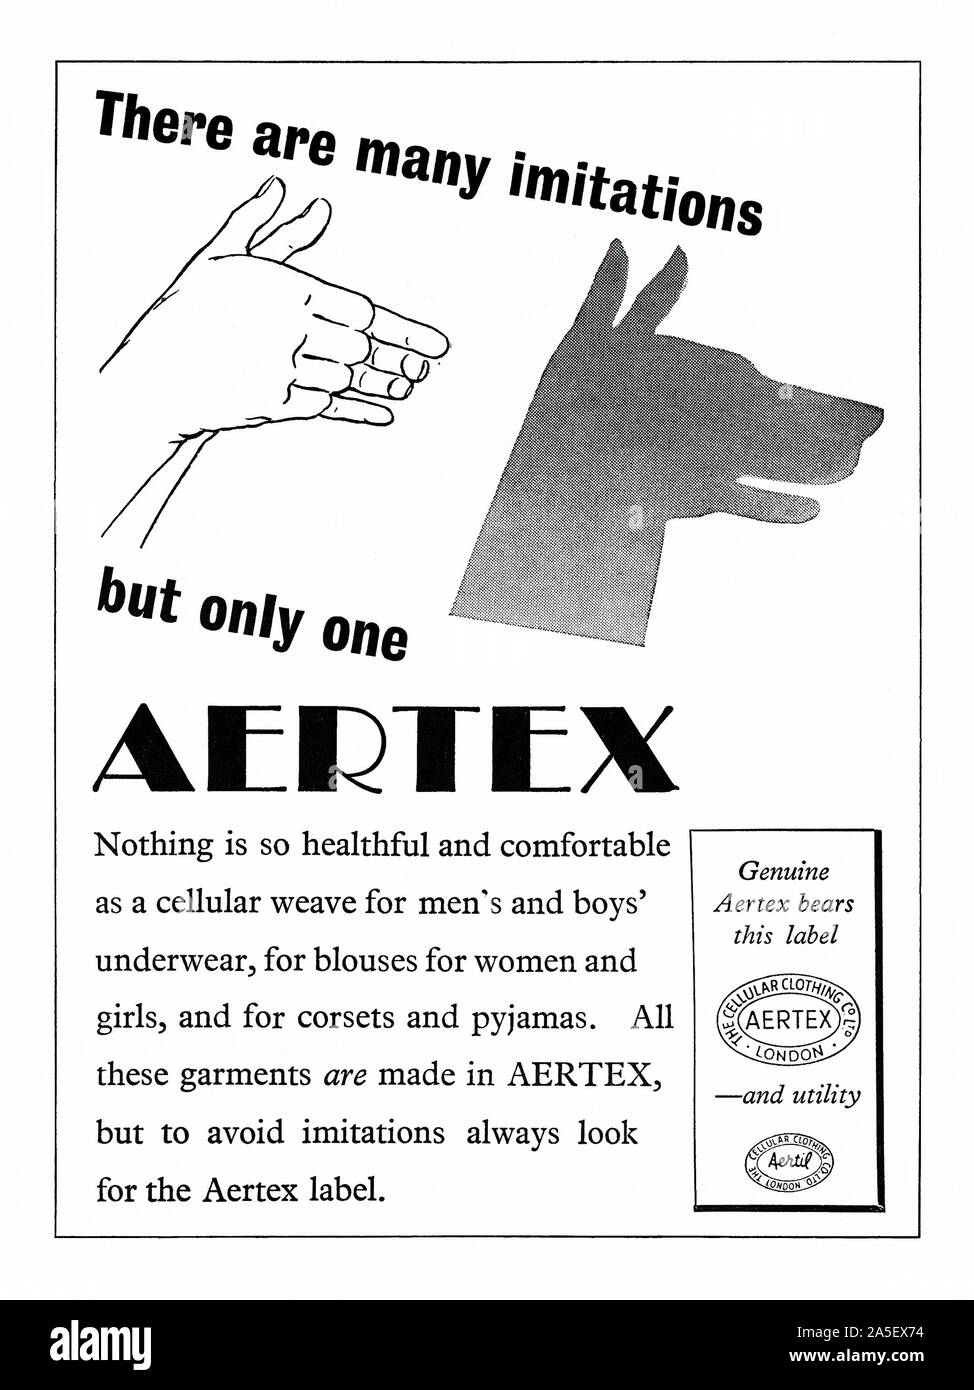 Advert for Aertex cellular fabric and clothing, 1951. The illustration  shows a pair of hands forming a shadow puppet of a dog's head and the copy  emphasising the need to avoid imitations